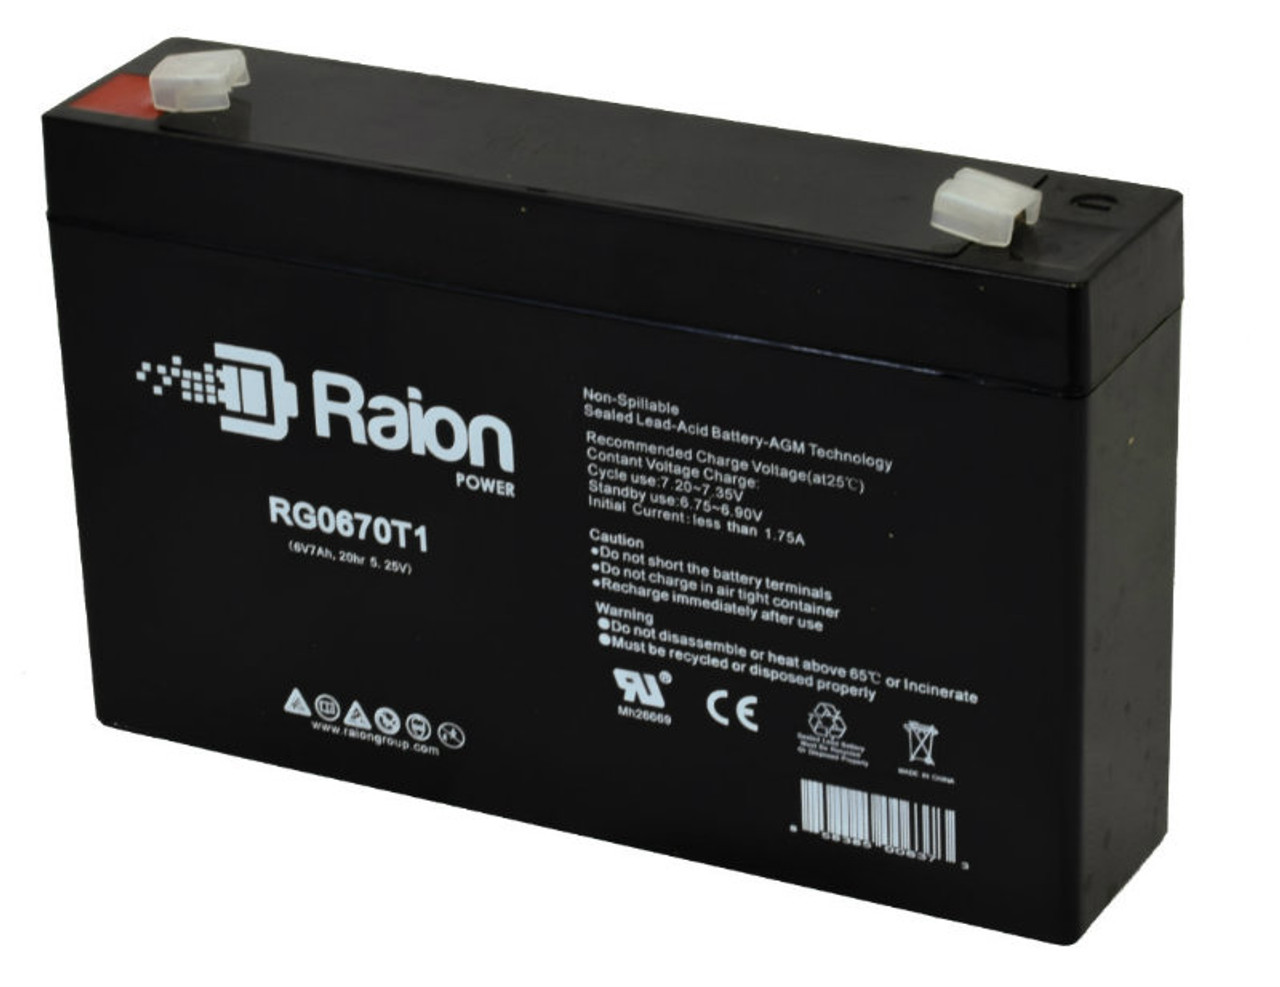 Raion Power RG0670T1 6V 7Ah Replacement Battery Cartridge for Cavitron ISOLLETTE Medical Equipment